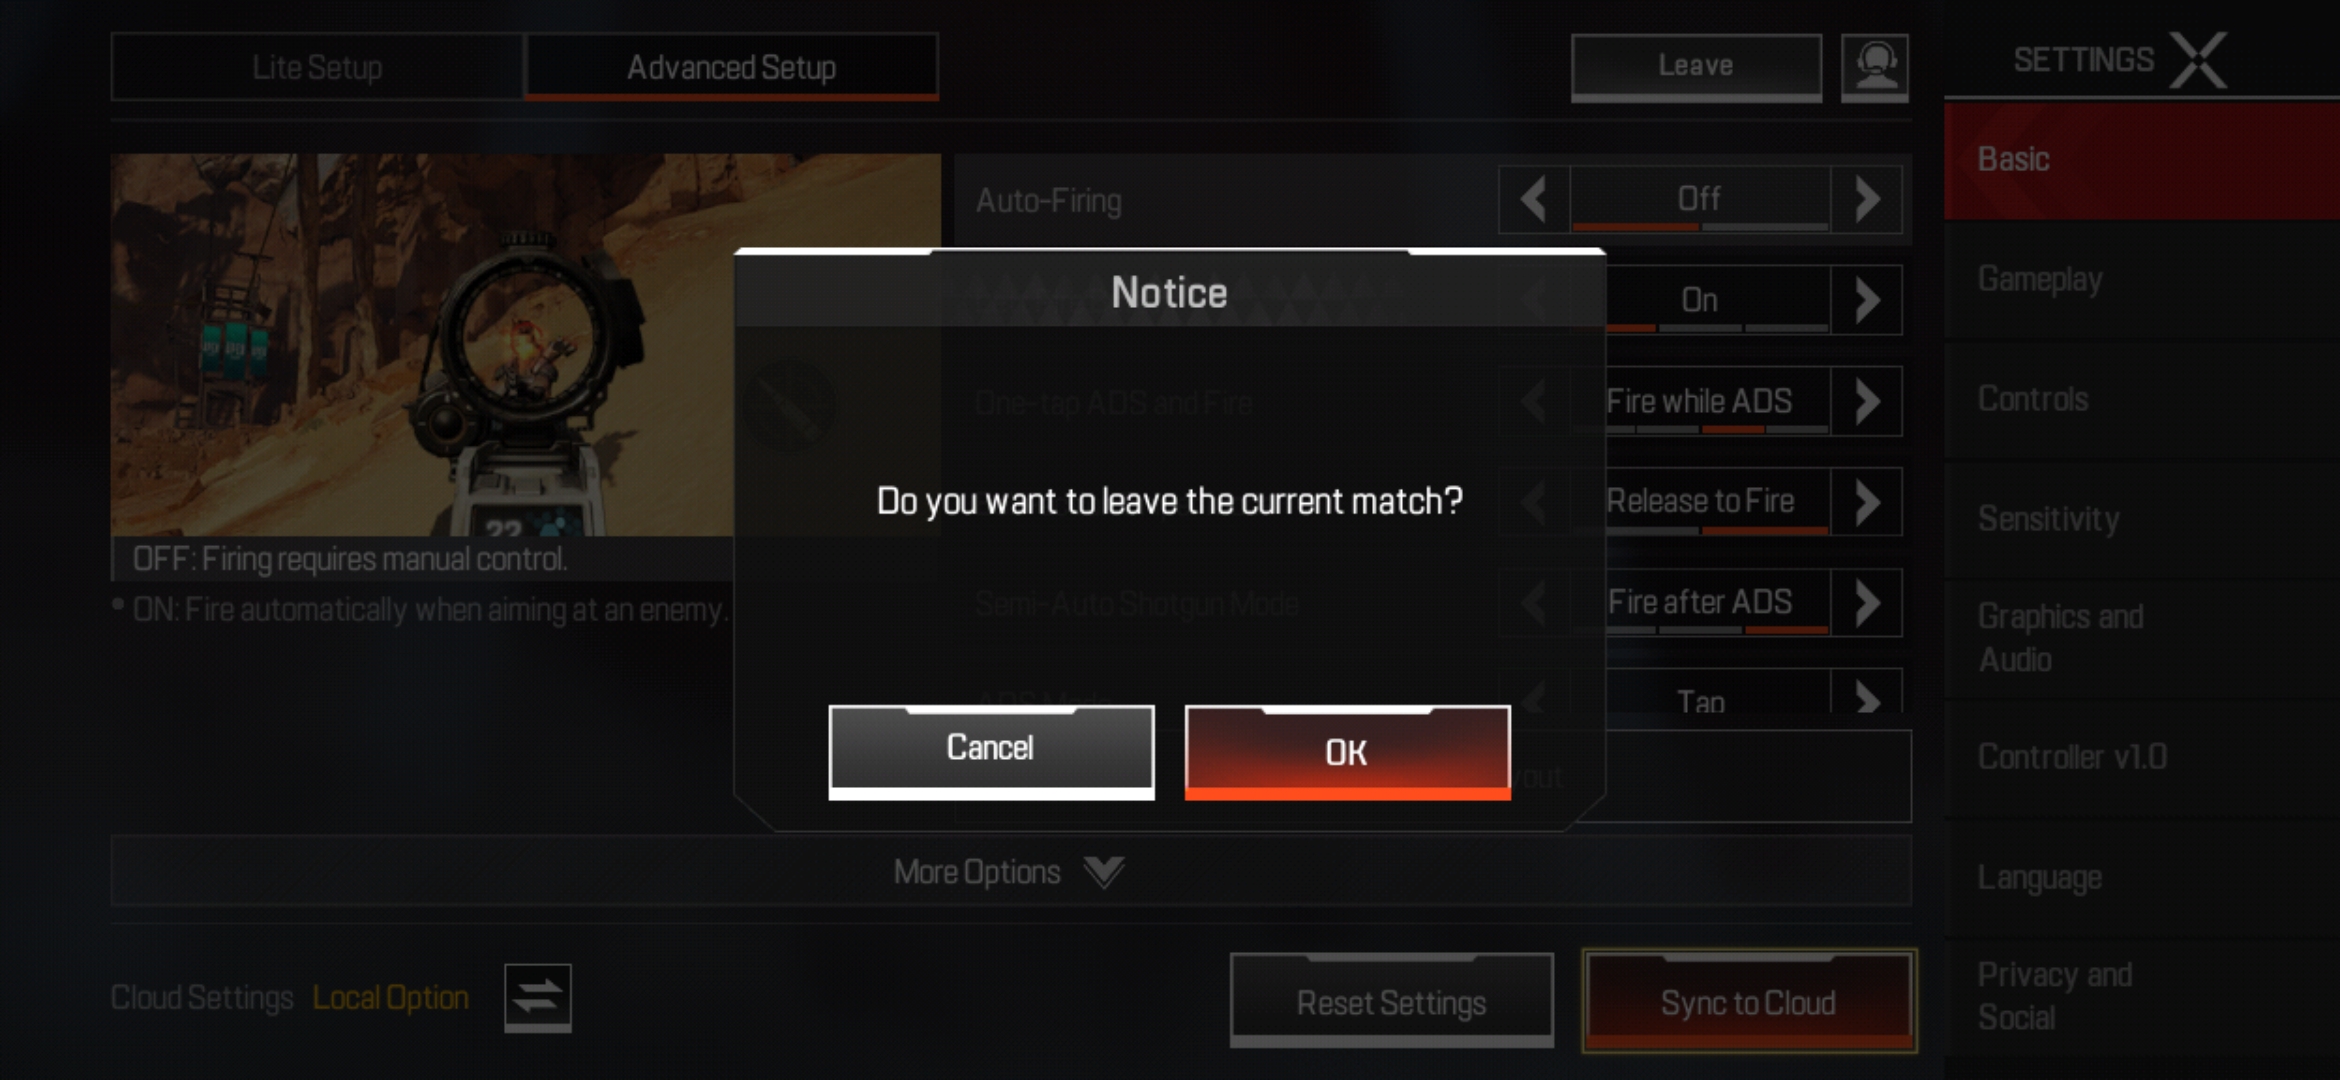 Apex Legends Mobile: Leaver Penalty Will Be Removed For Non-Ranked Matches in an Upcoming Patch